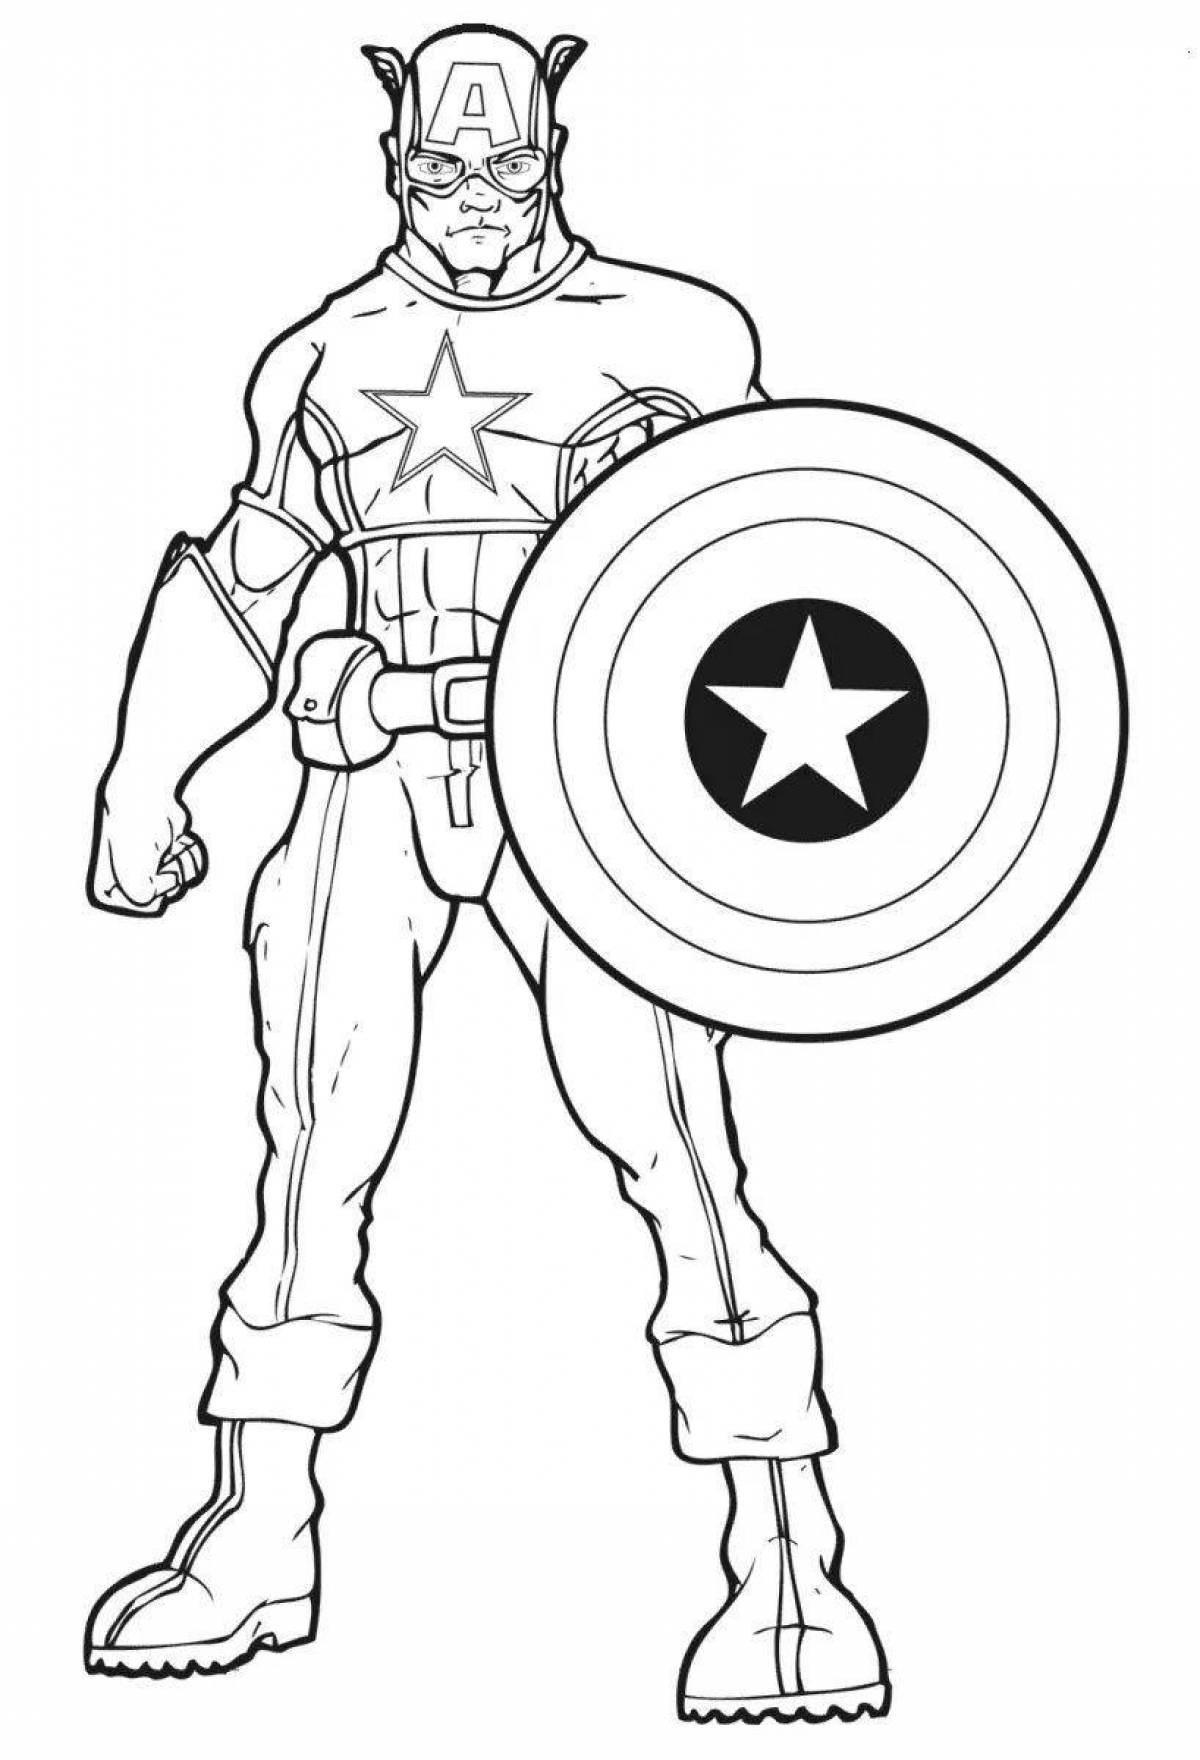 Amazing marvel heroes coloring book for kids